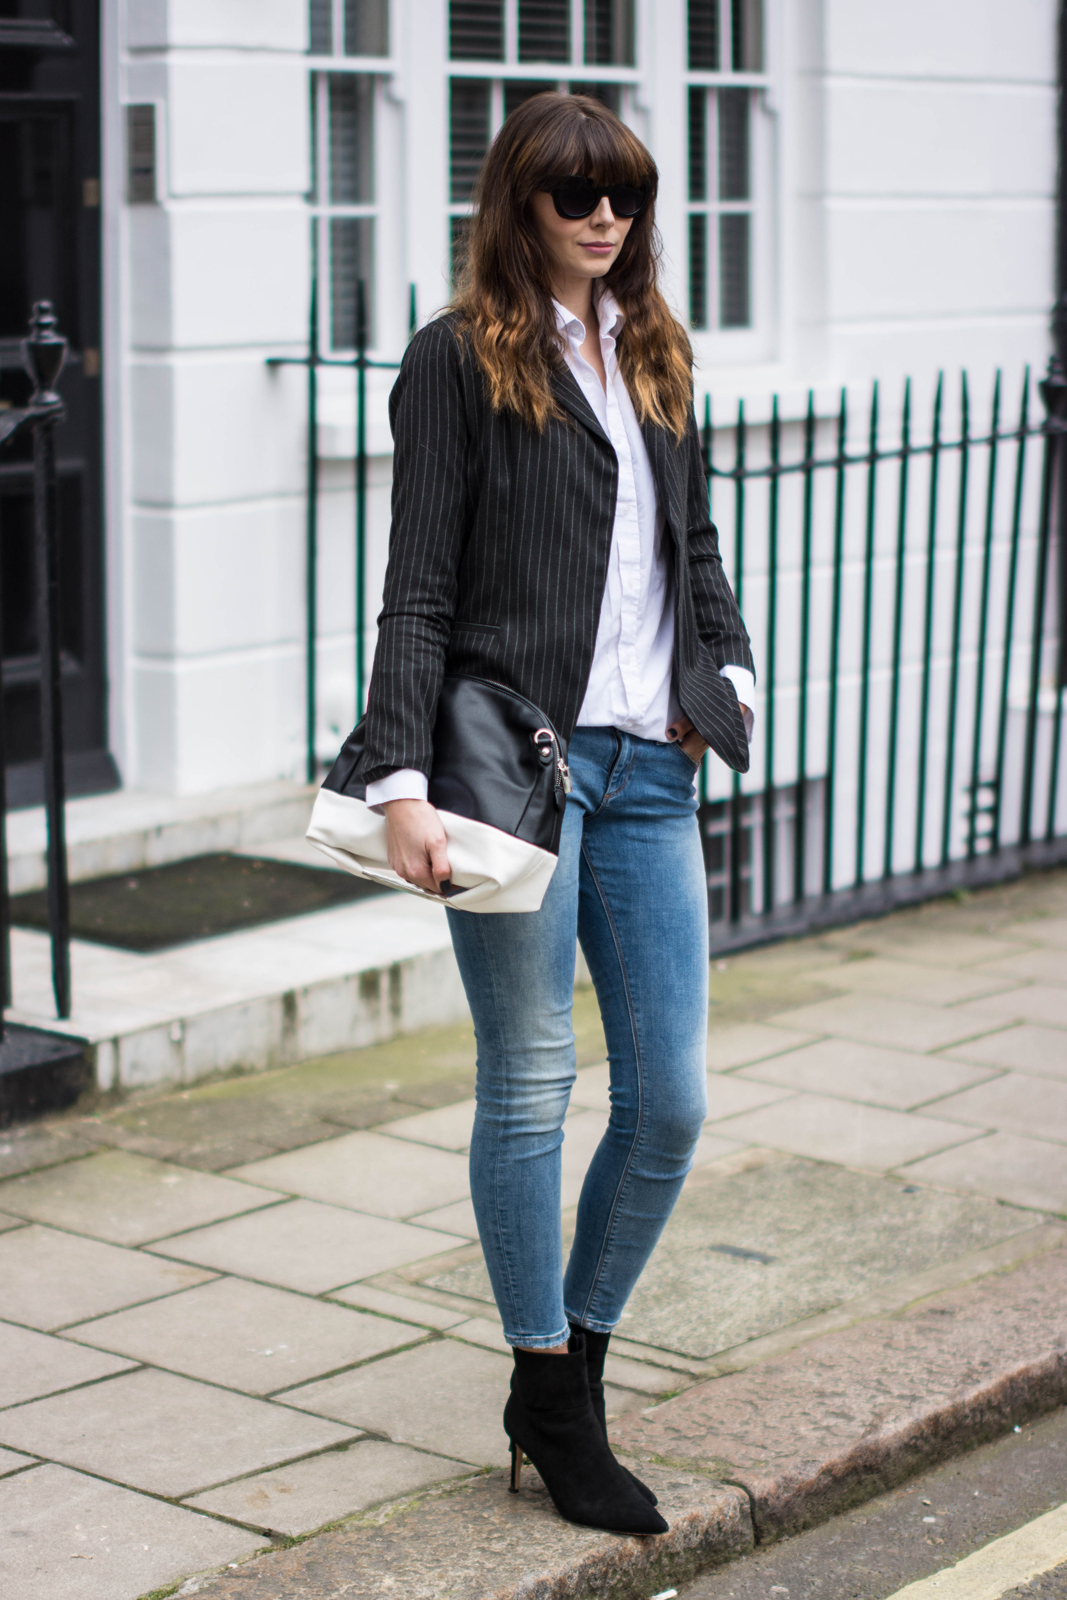 EJSTYLE - Emma Hill, Fashion Blogger, Zara Black White clutch bag, Pinstripe blazer, blue skinny jeans, white shirt, Dune naturally black suede ankle boots, OOTD, street style